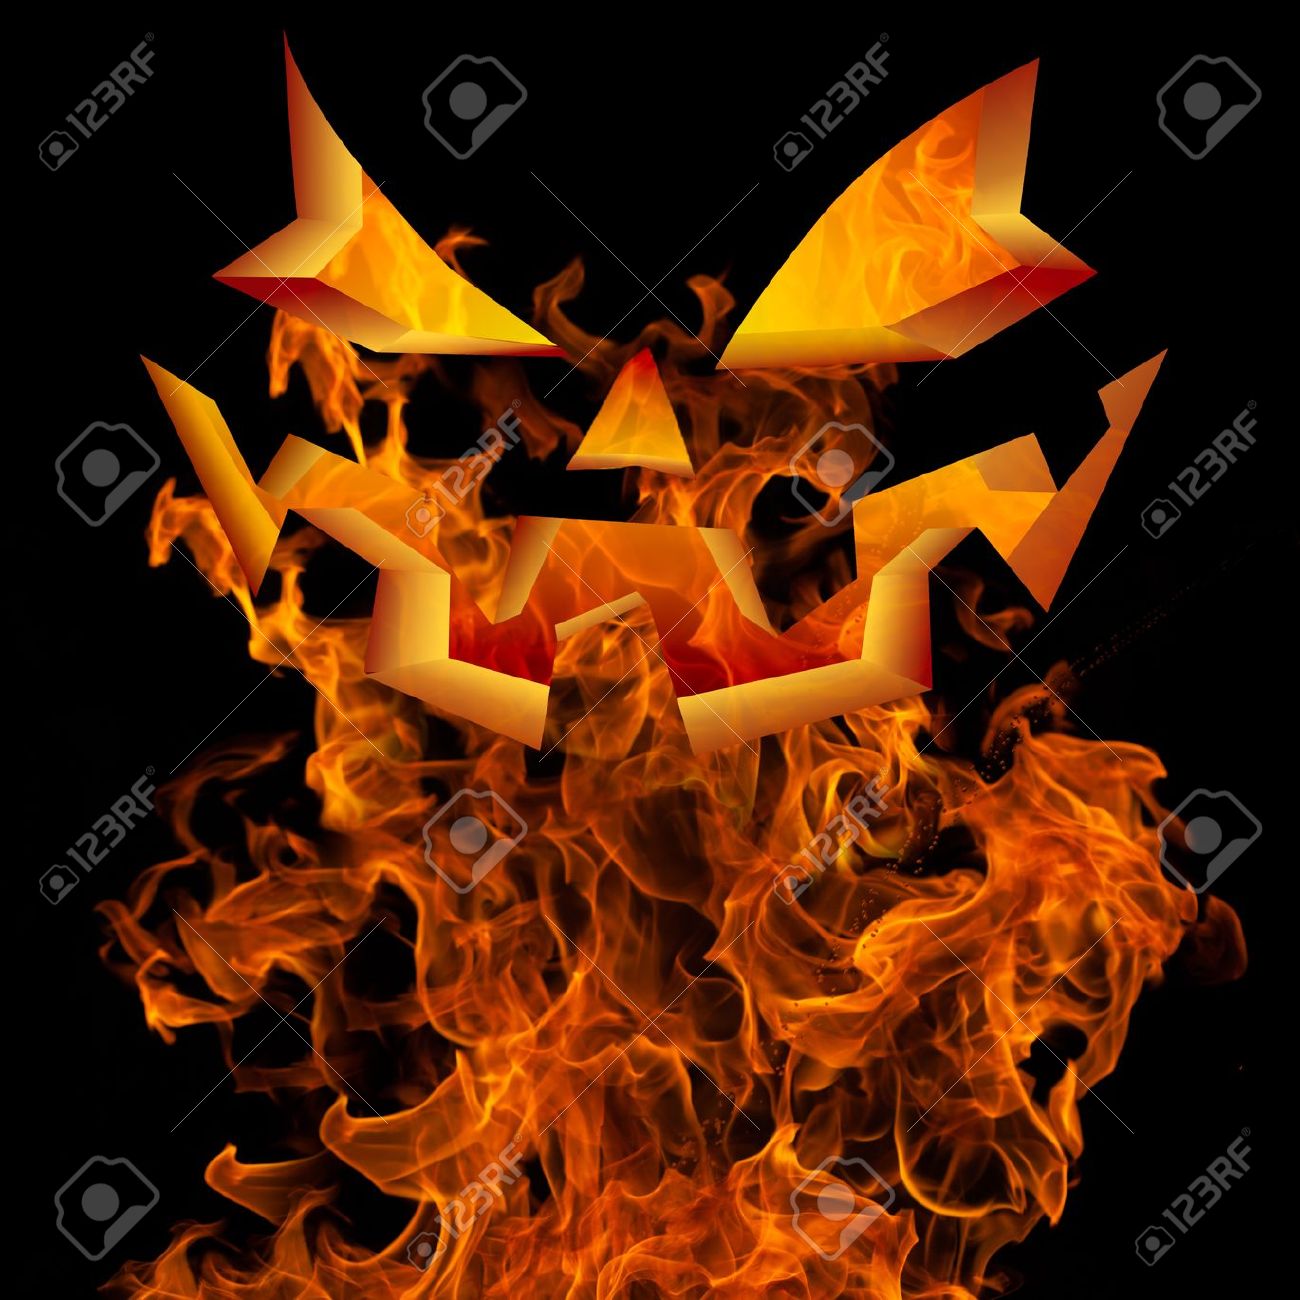 Halloween Background Design With Scary Flaming Jack O Lantern